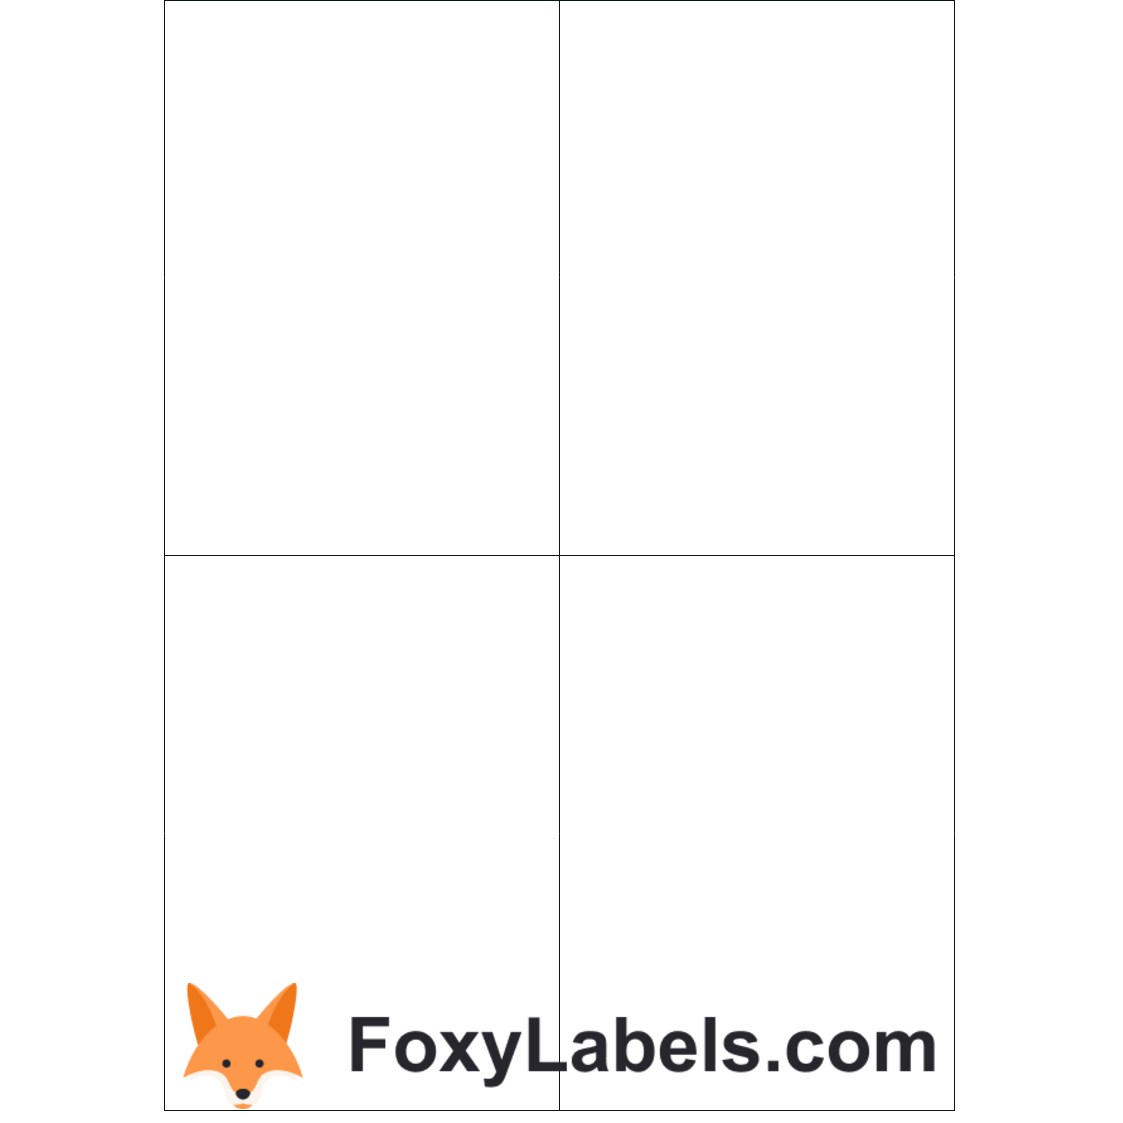 Avery 3483 label template for Google Docs